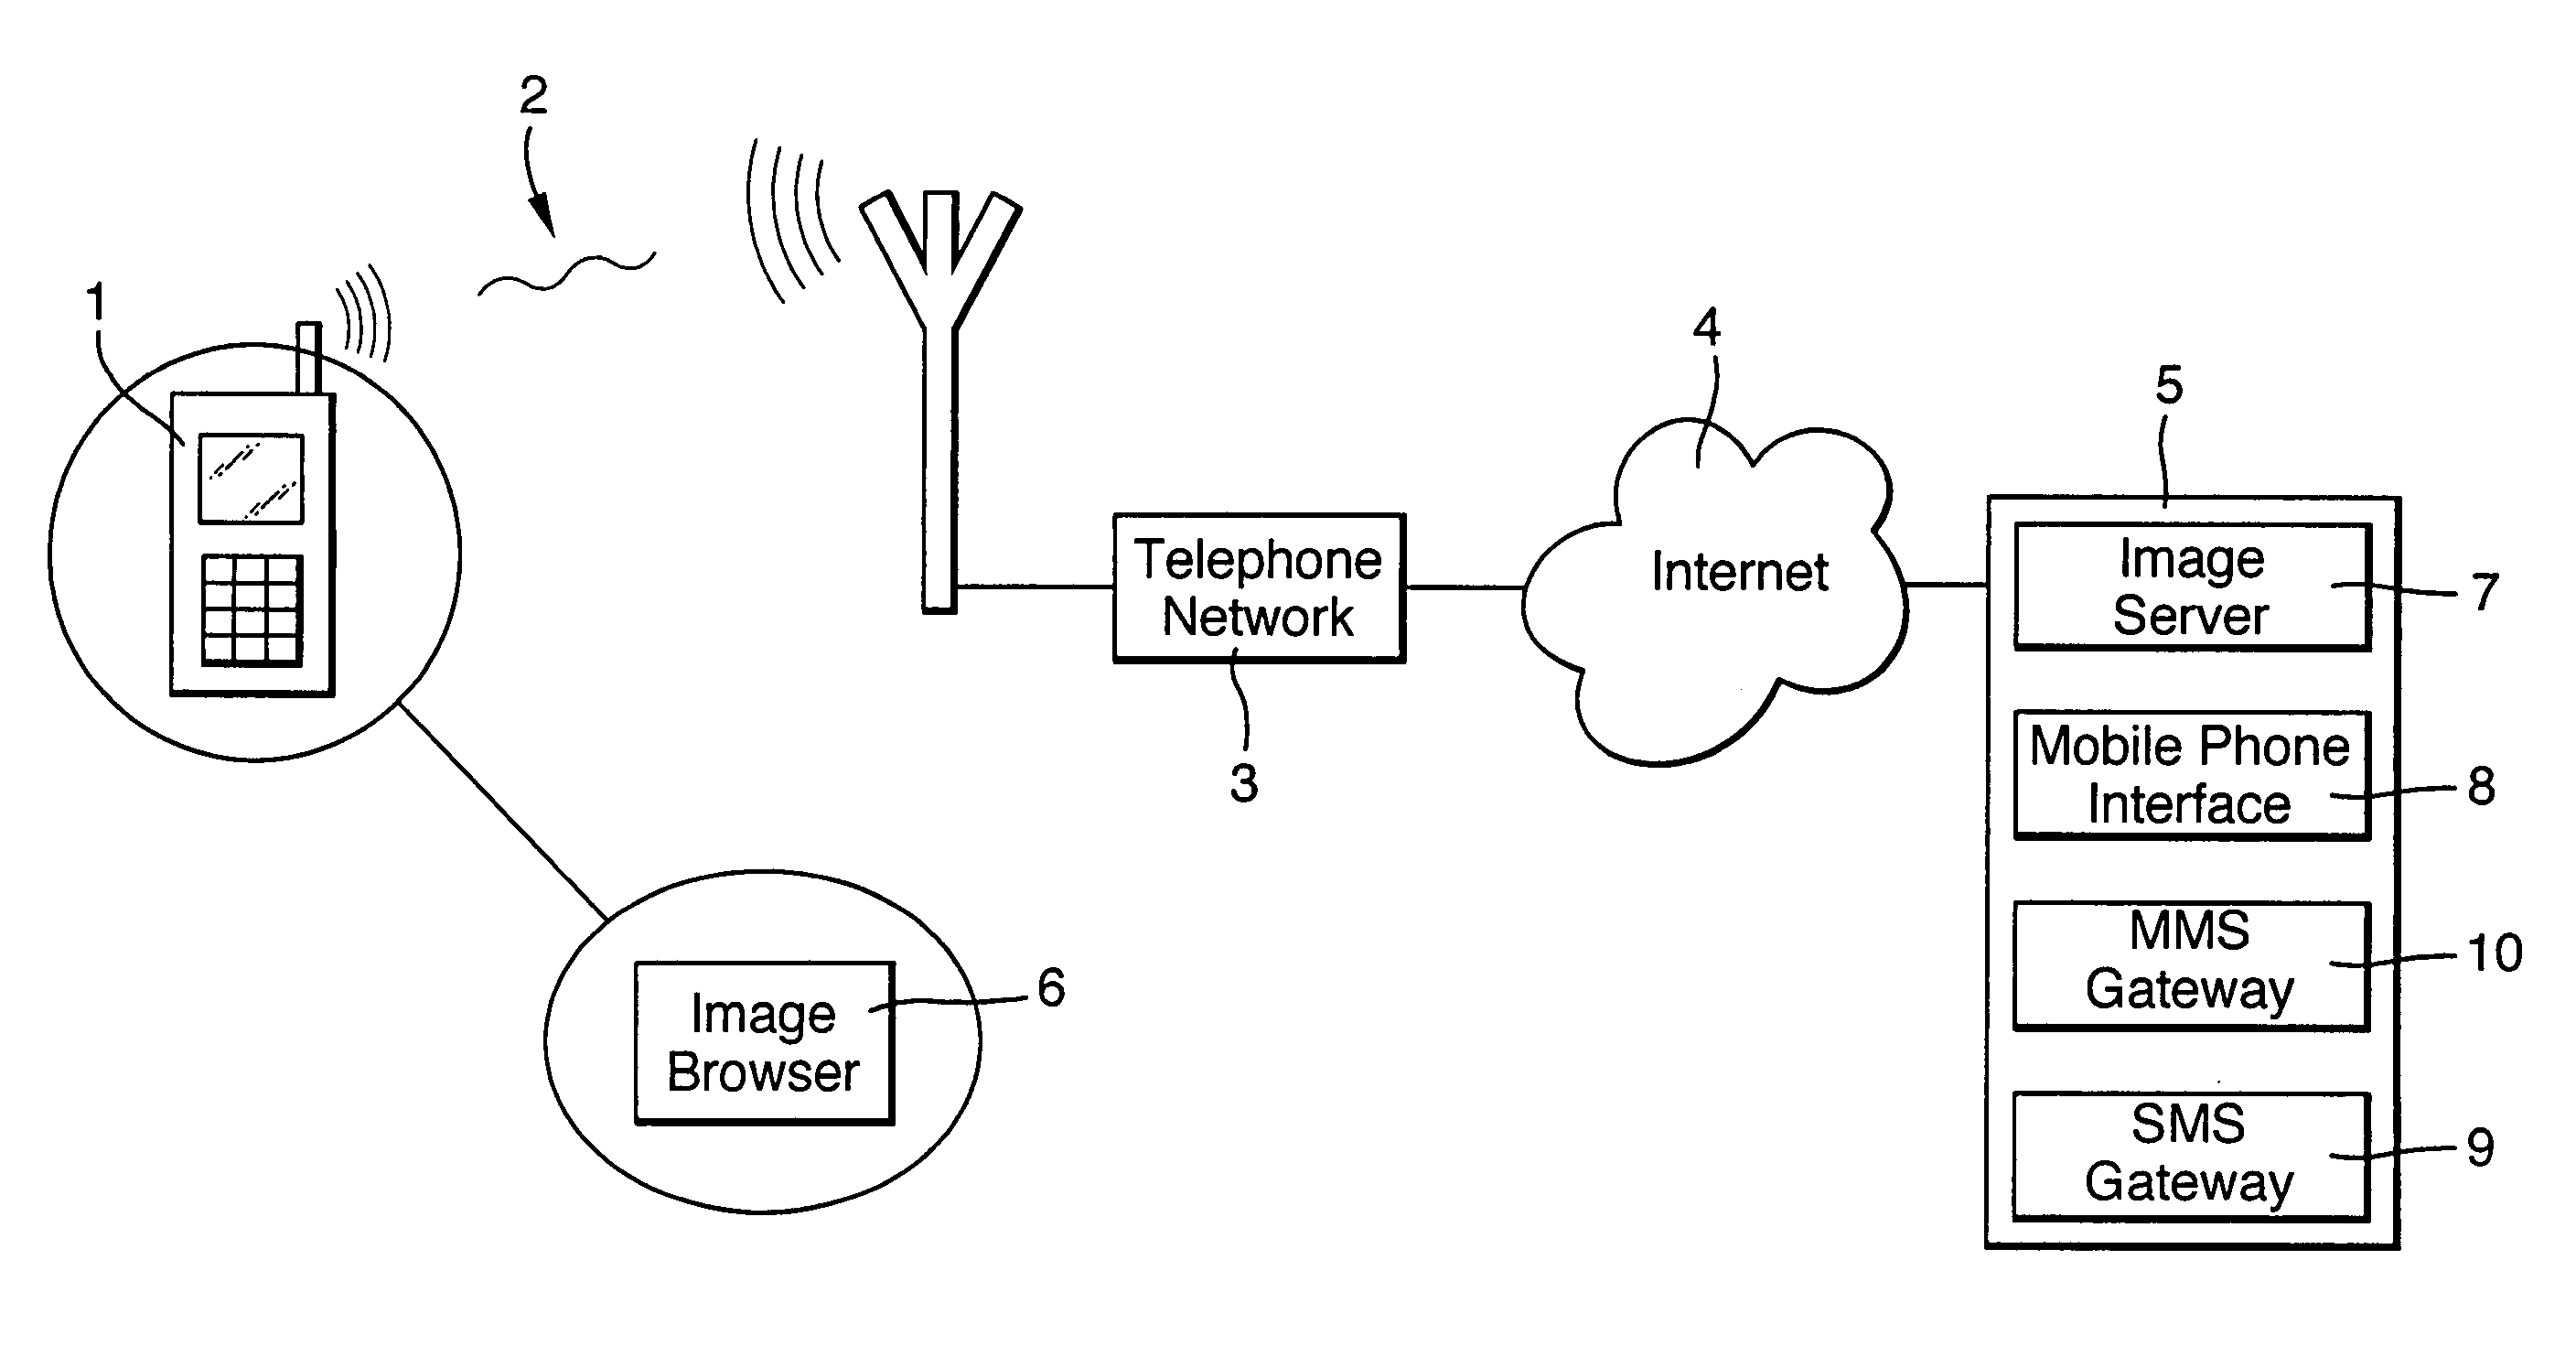 Mobile phone image display system